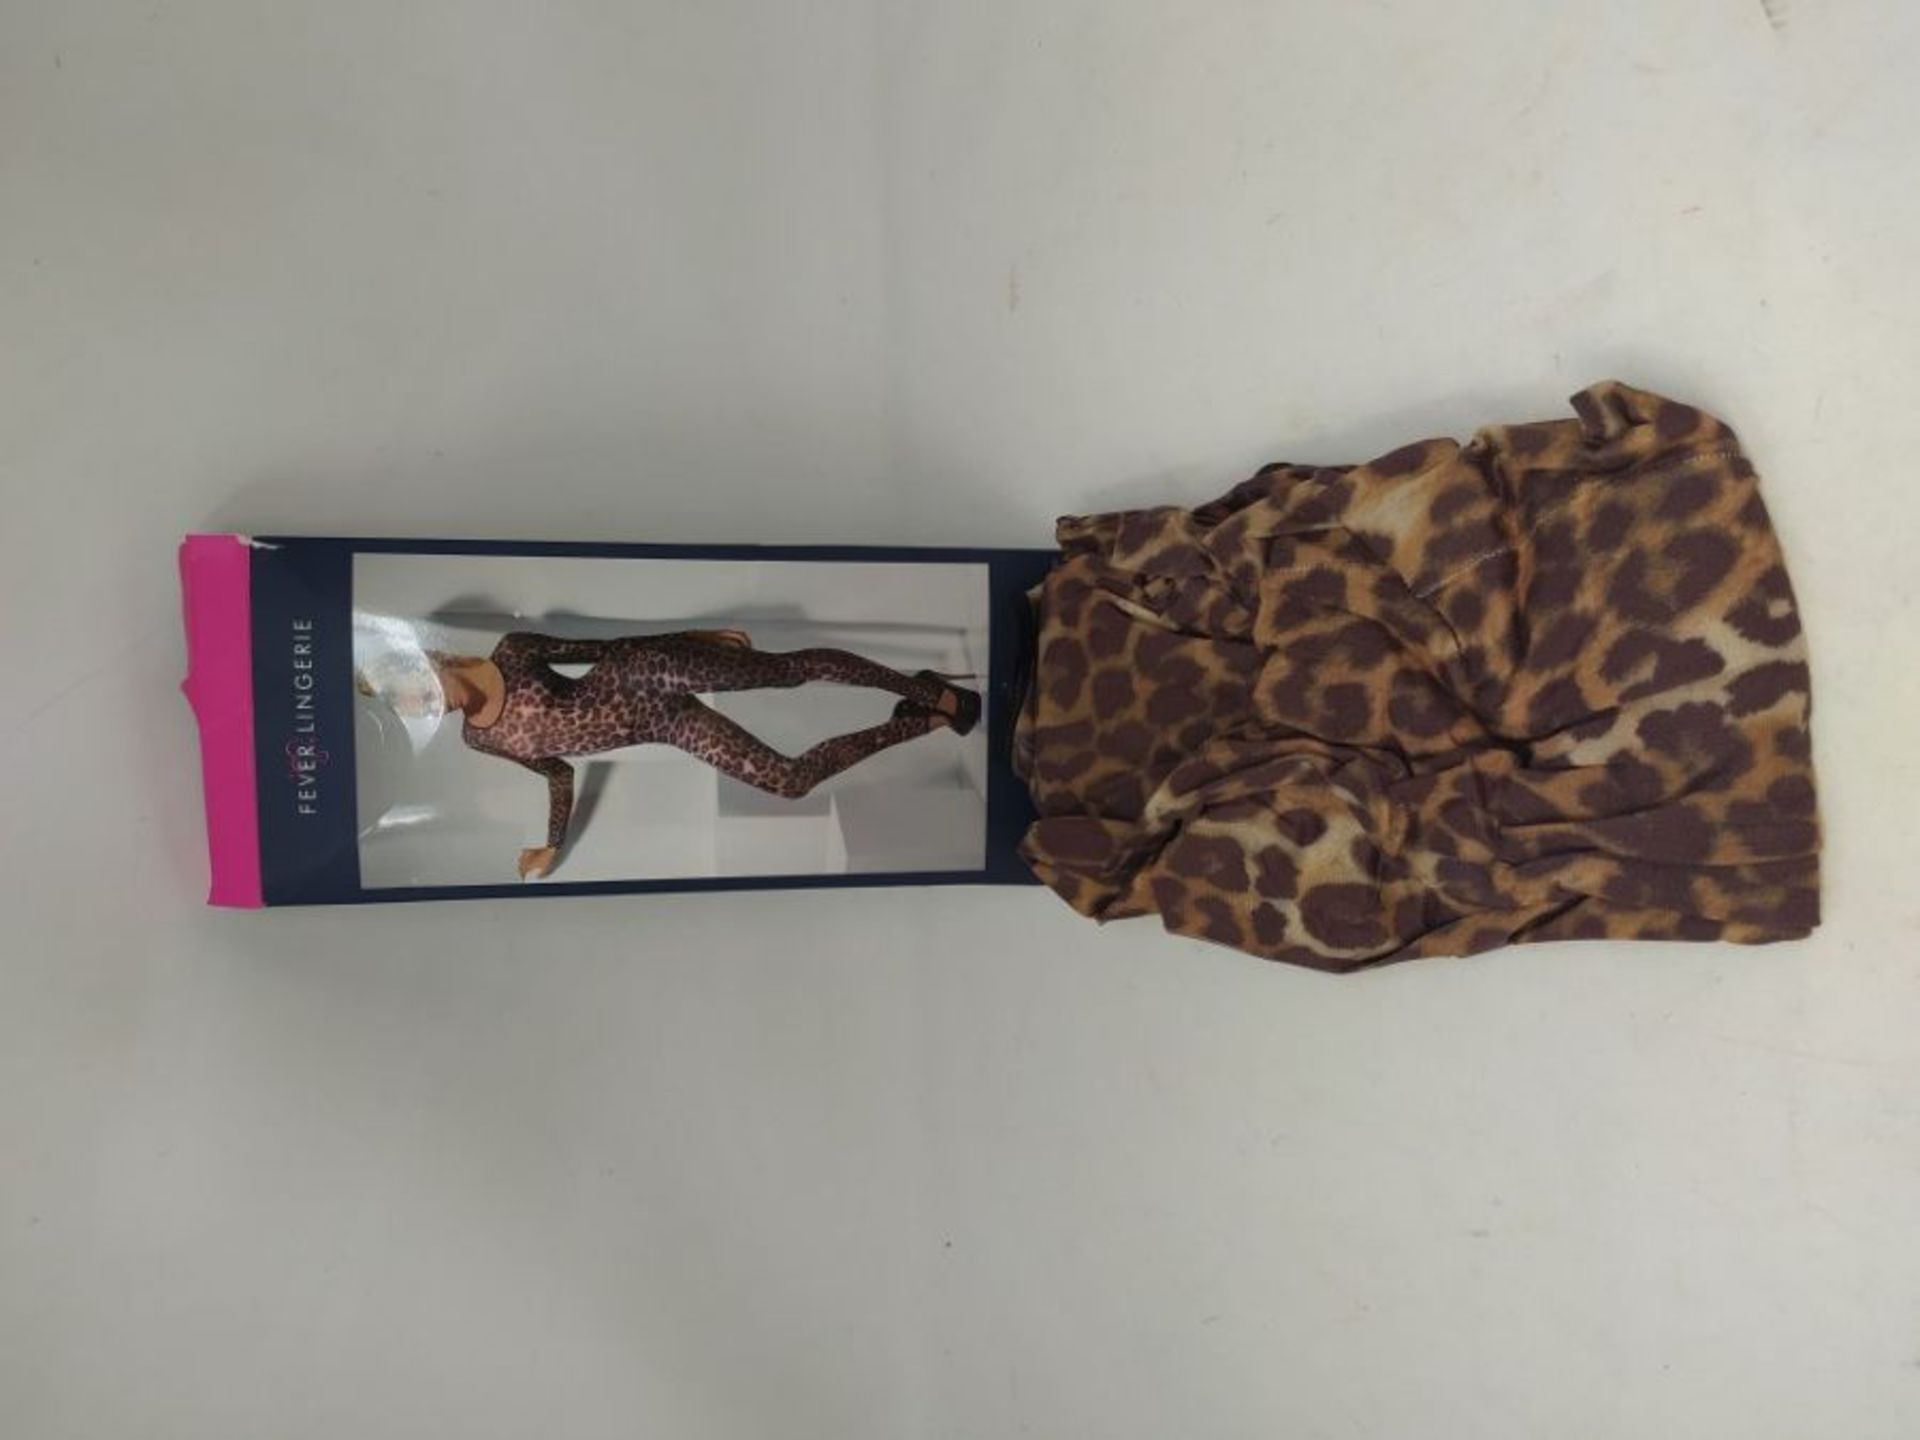 Fever Women's Cheetah Print Bodysuit, One Size, Colour: Brown, 26811 - Image 2 of 2